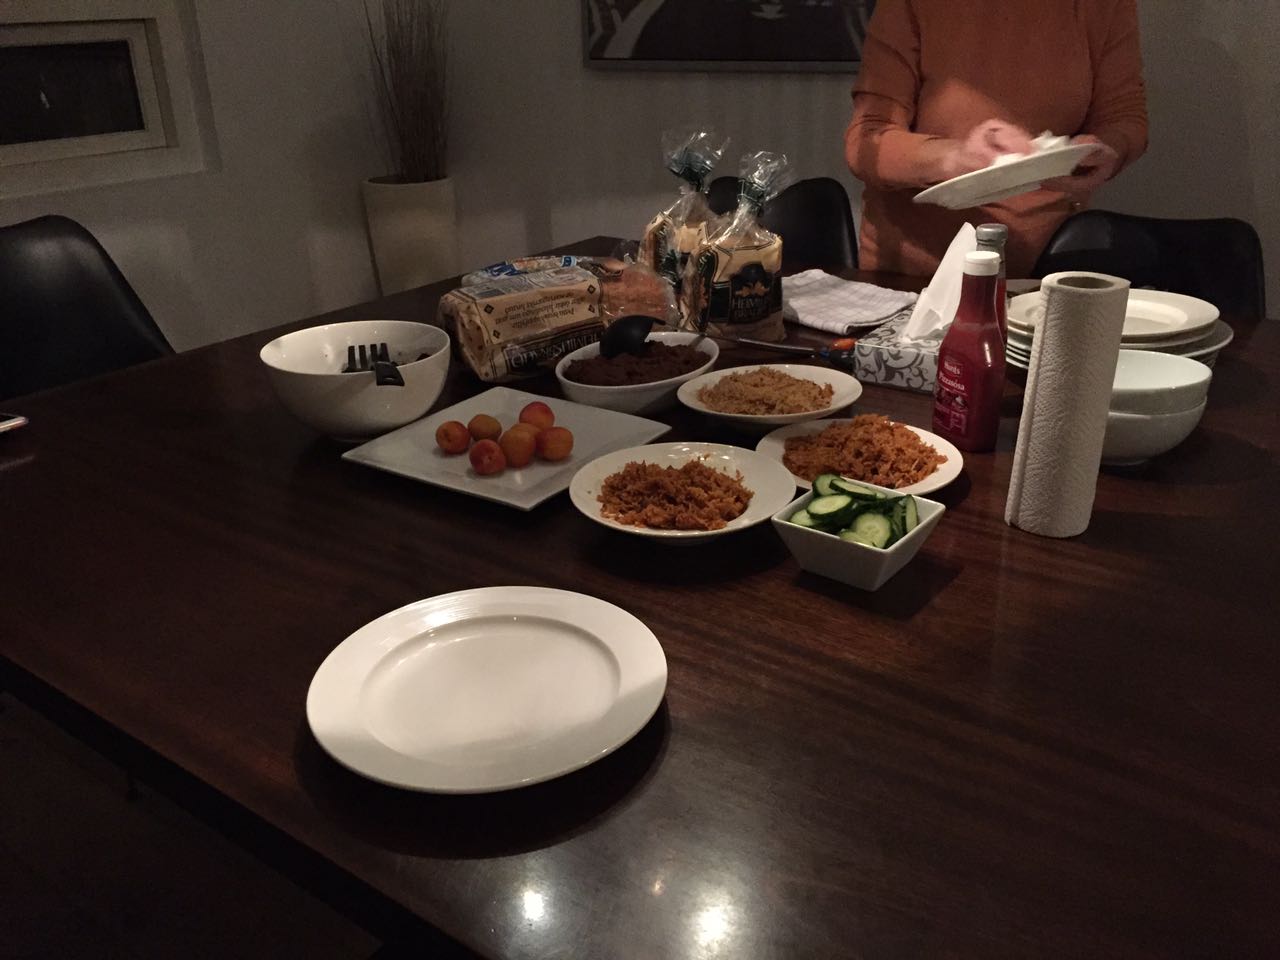 A homemade meal during our Iceland trip